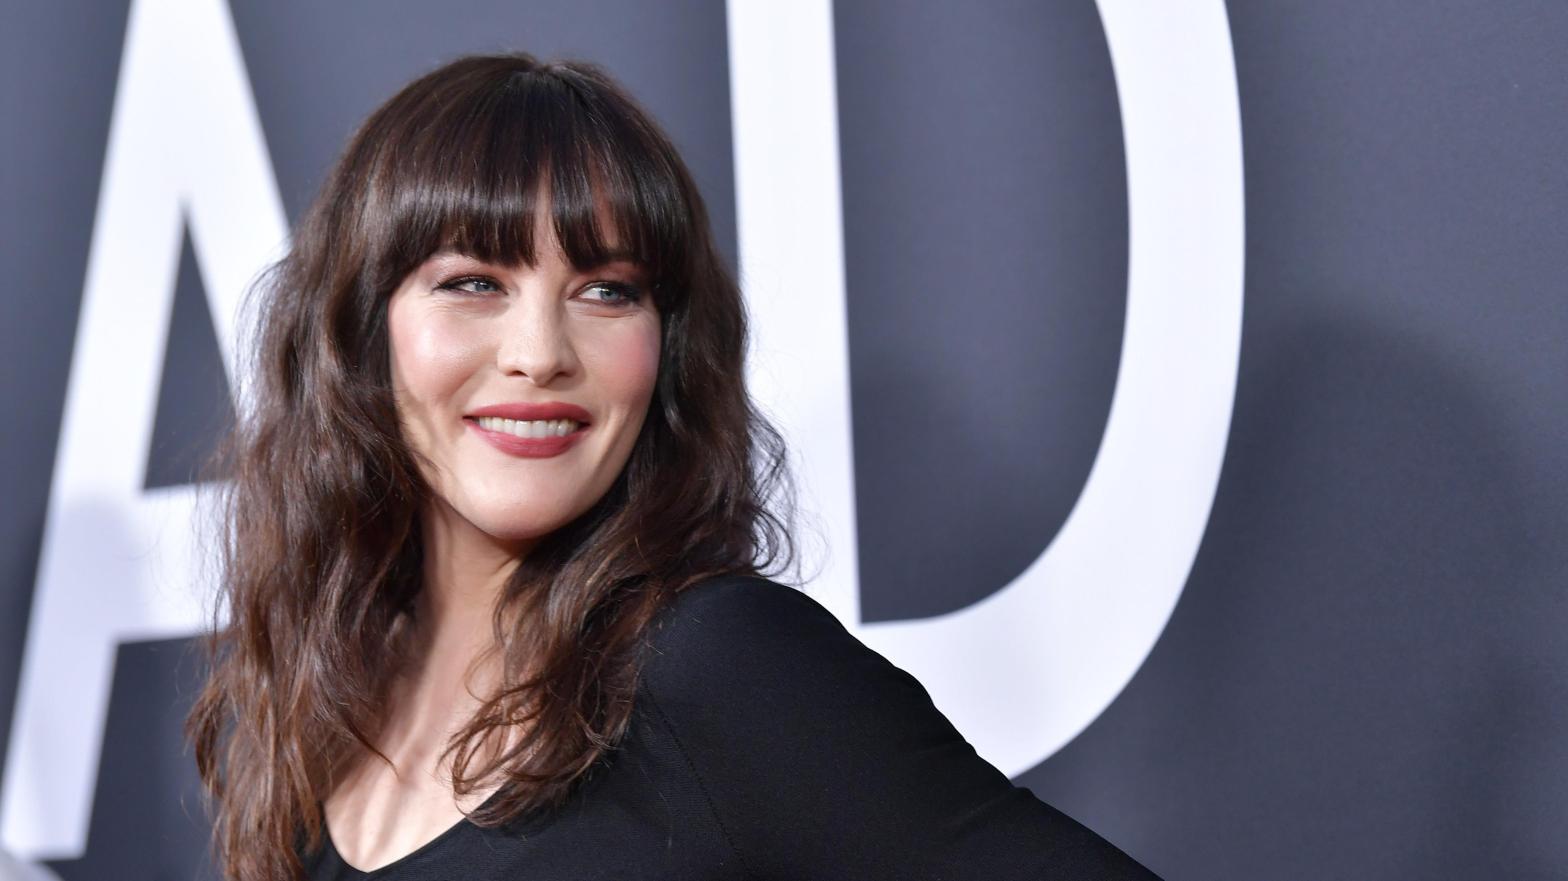 Liv Tyler attends the premiere of 20th Century Fox's Ad Astra on September 18, 2019 in Los Angeles, California.  (Photo: Amy Sussman, Getty Images)